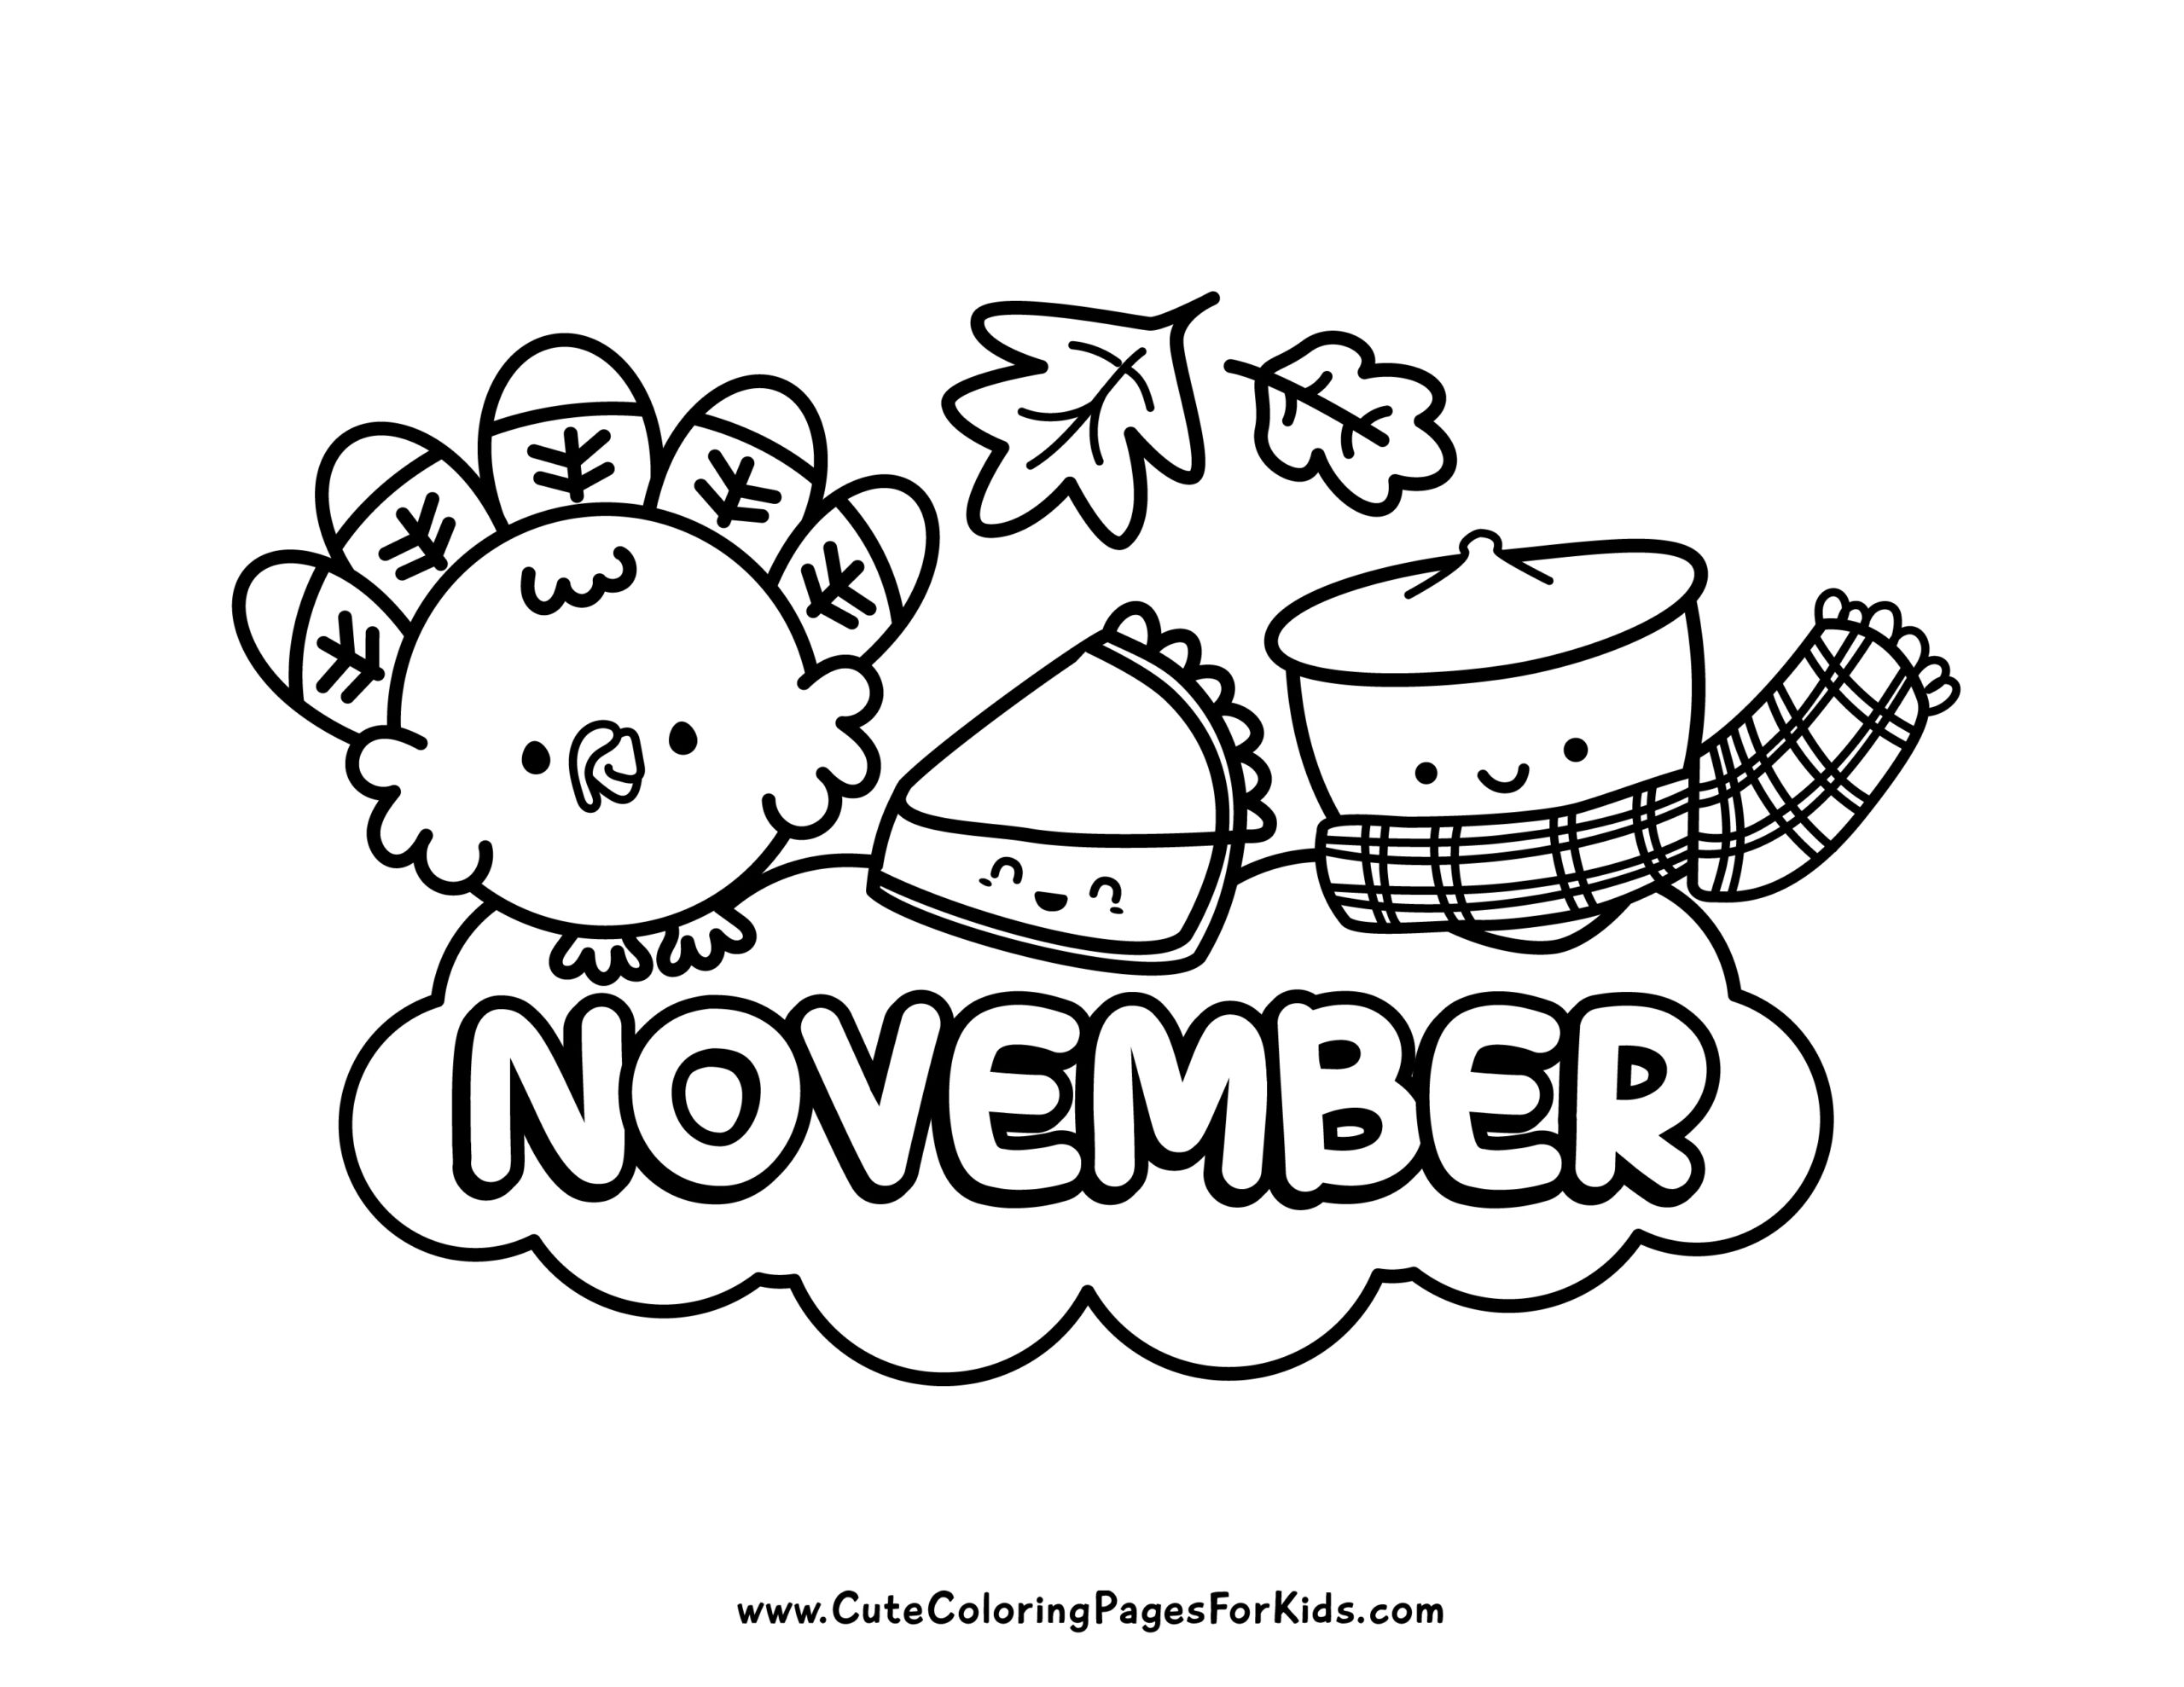 simple november coloring sheet with turkey, pie, and acorn